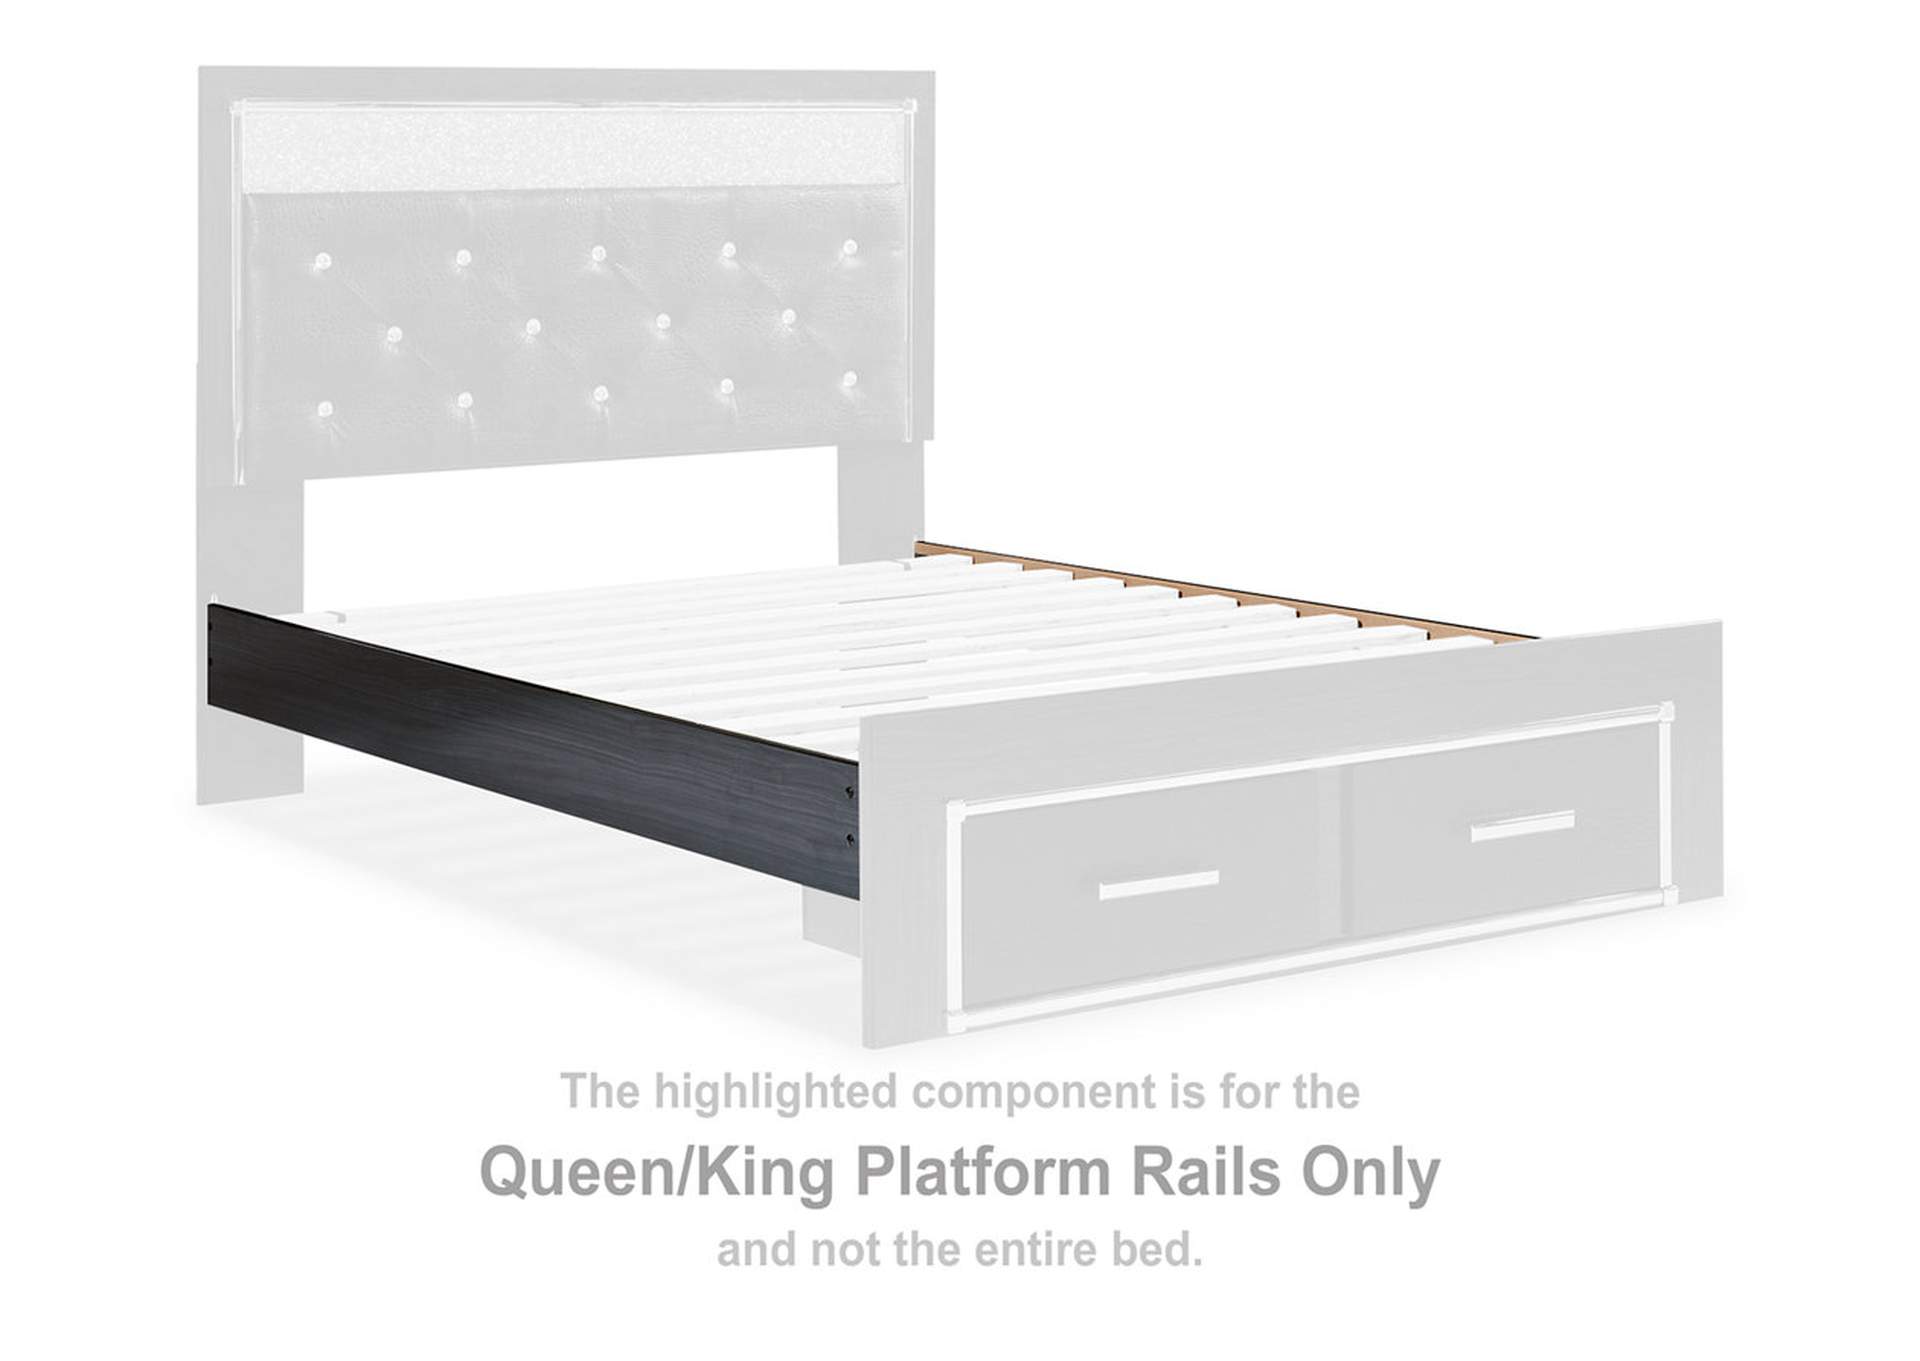 Kaydell Queen Upholstered Panel Storage Platform Bed, Dresser and Mirror,Signature Design By Ashley